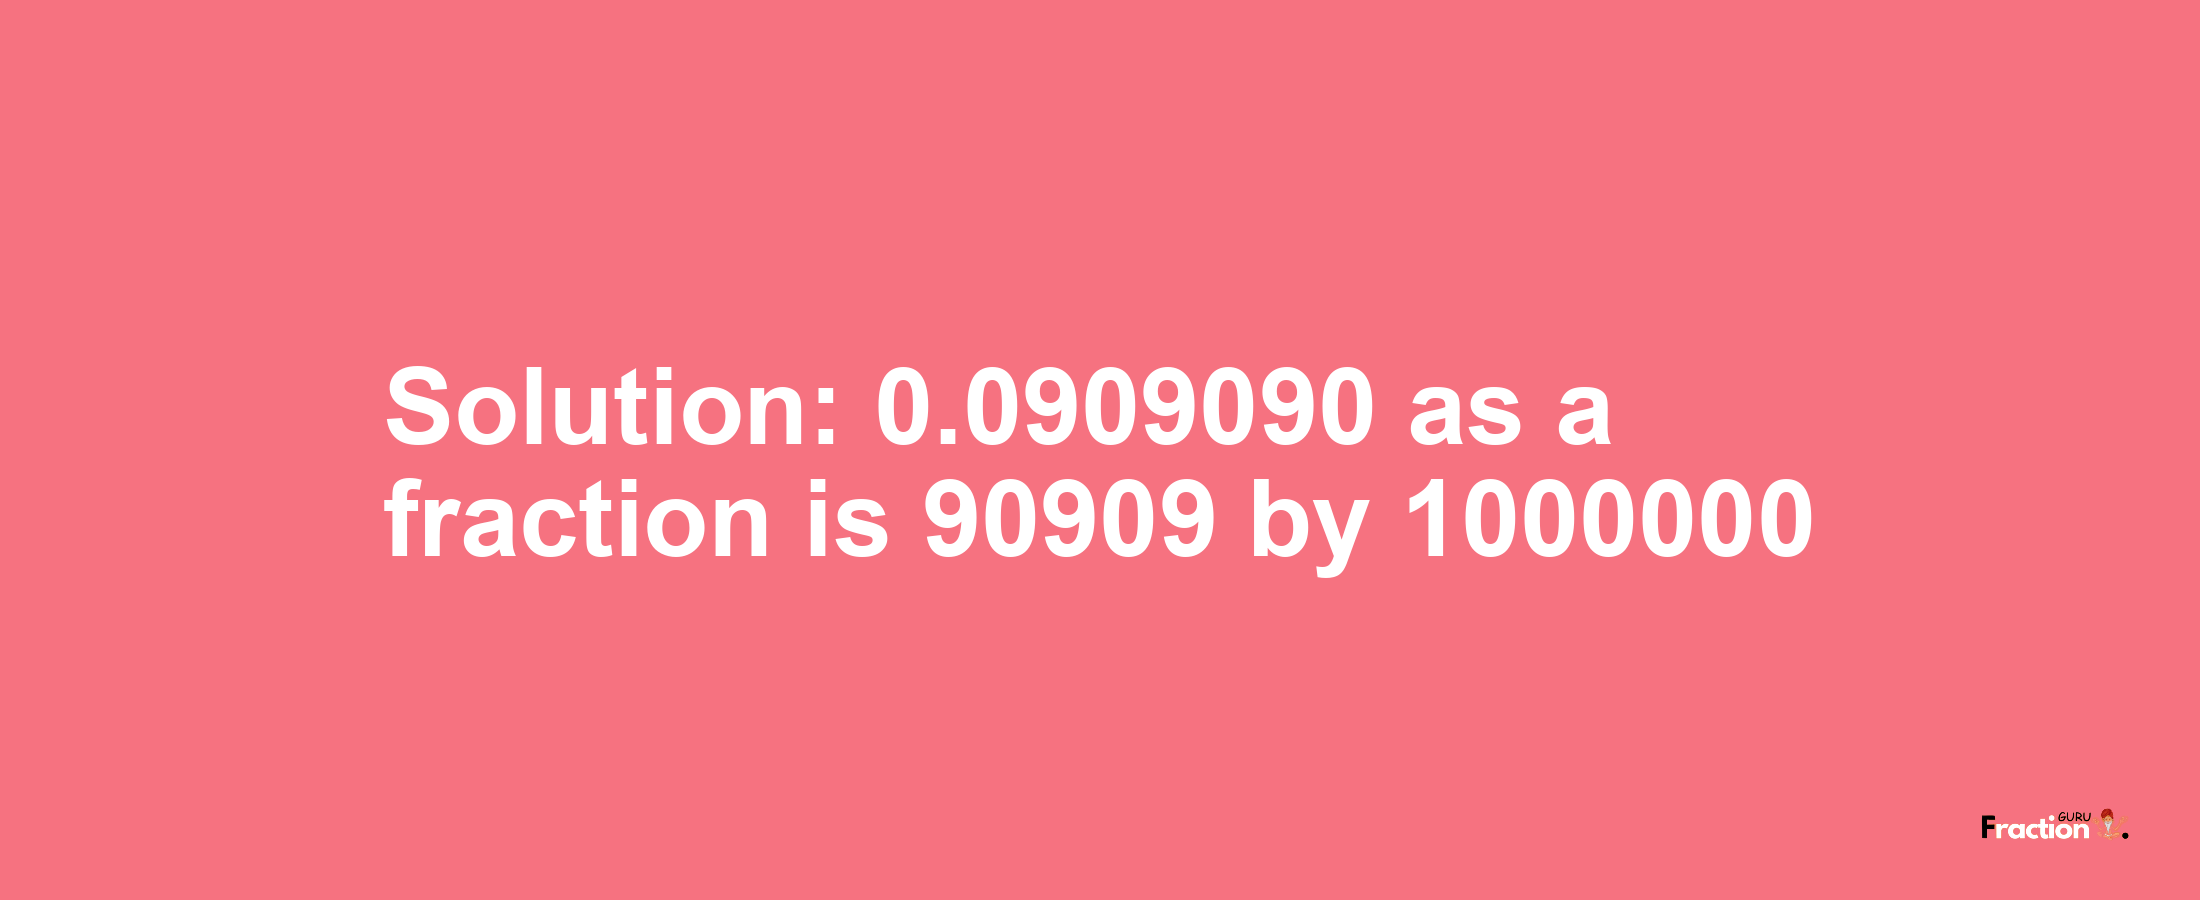 Solution:0.0909090 as a fraction is 90909/1000000